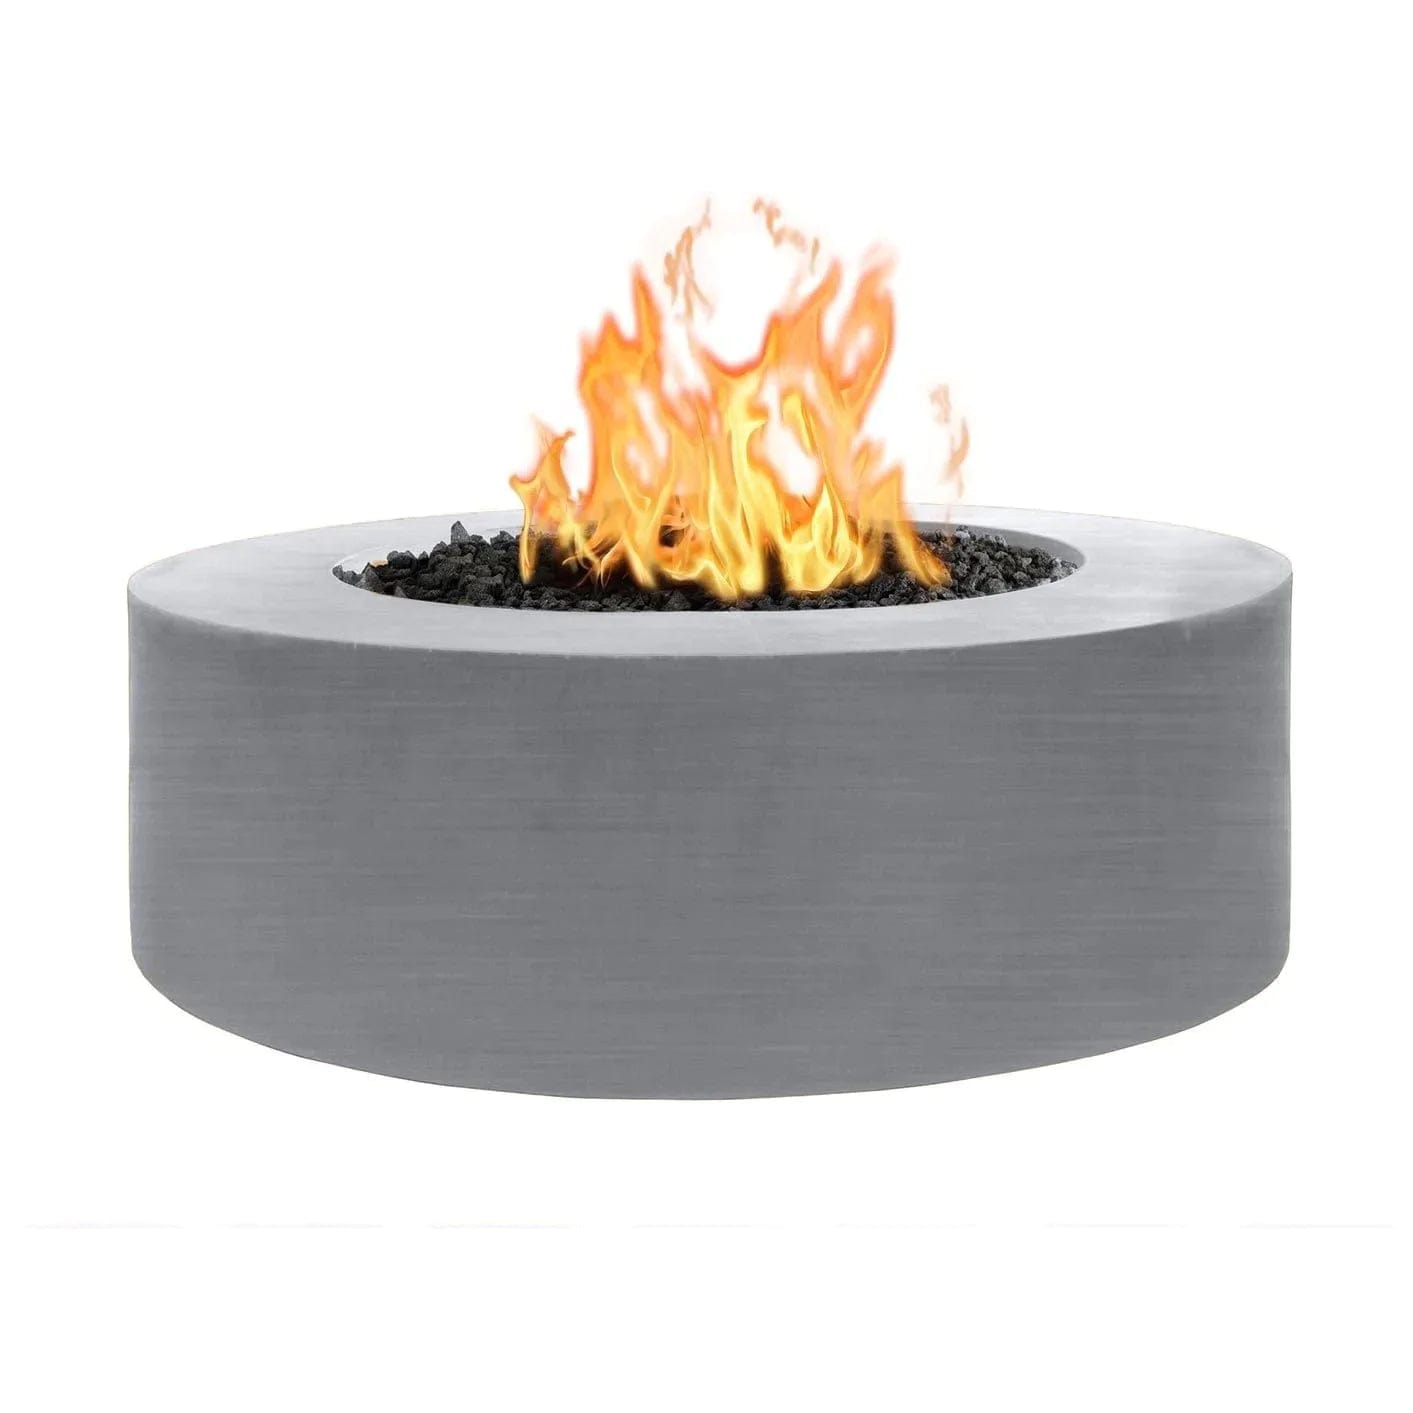 The Outdoor Plus 18-inch Tall Unity Fire Pit with stainless steel finish